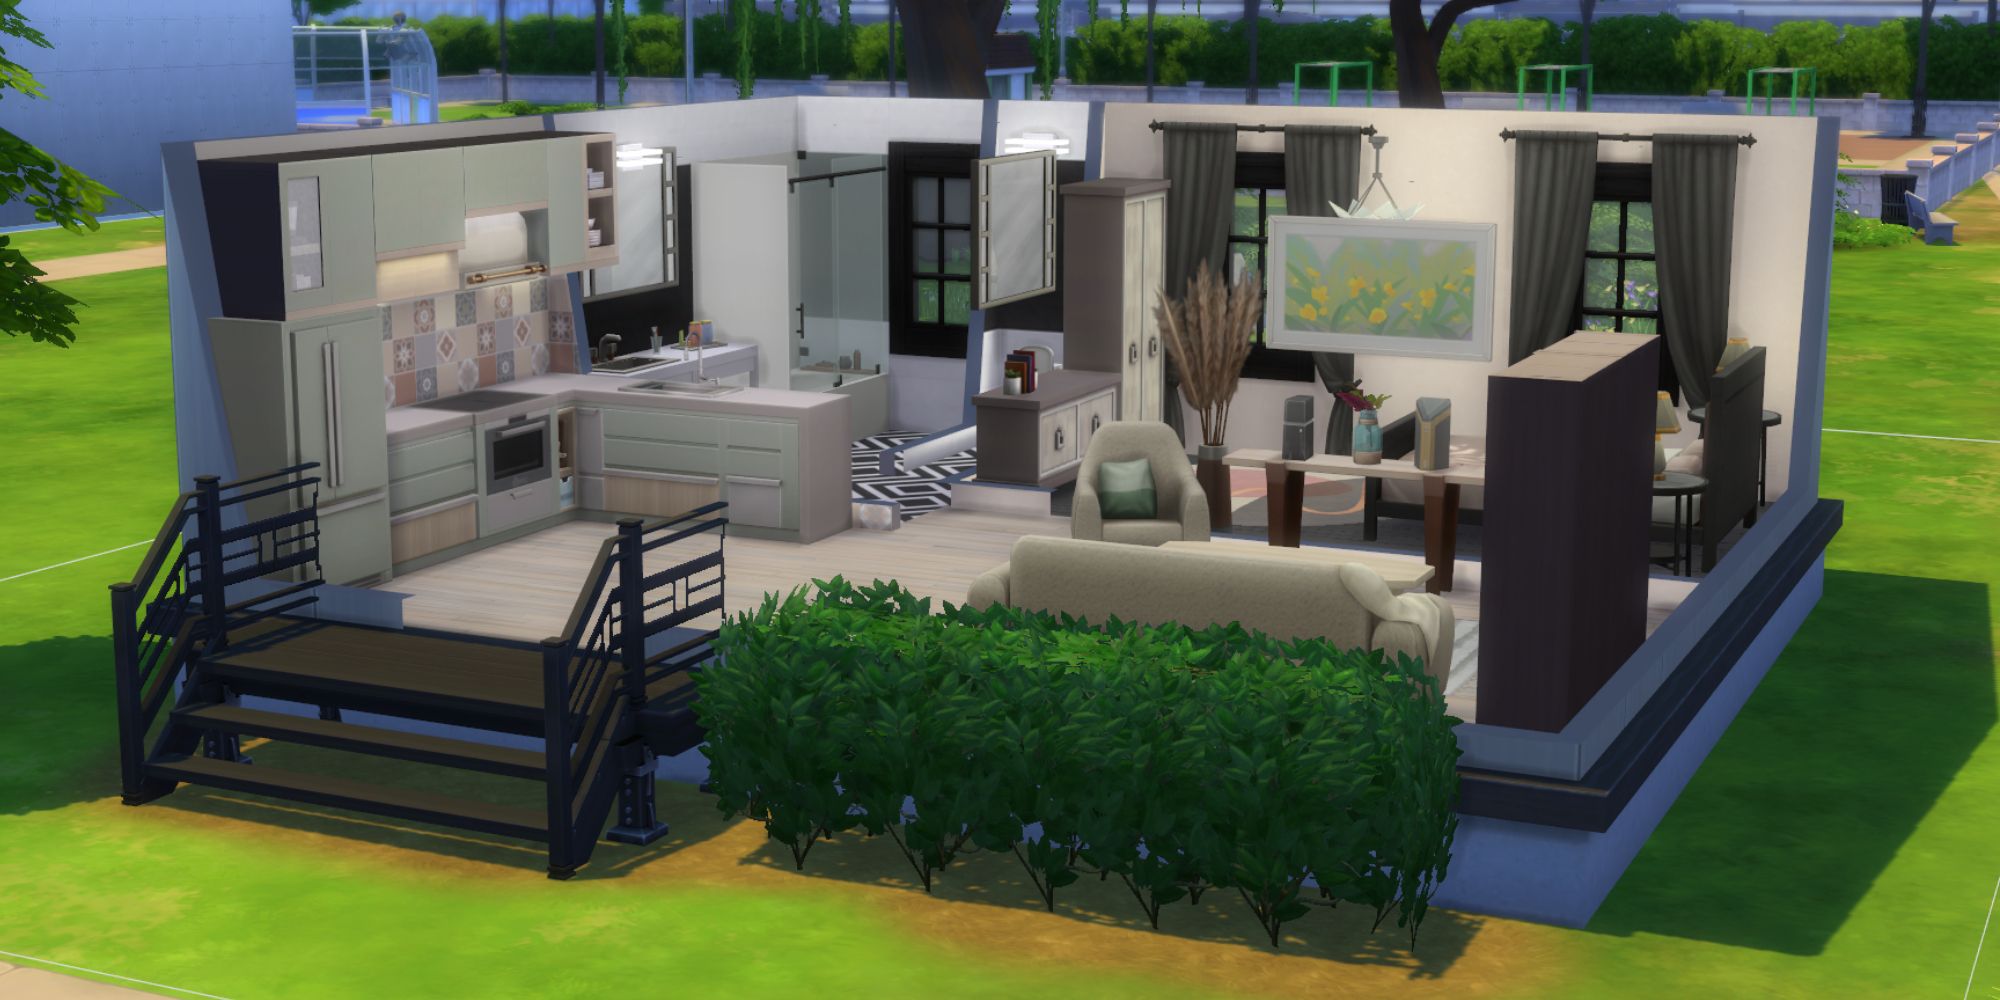 Sims 4 build mode house in newcrest